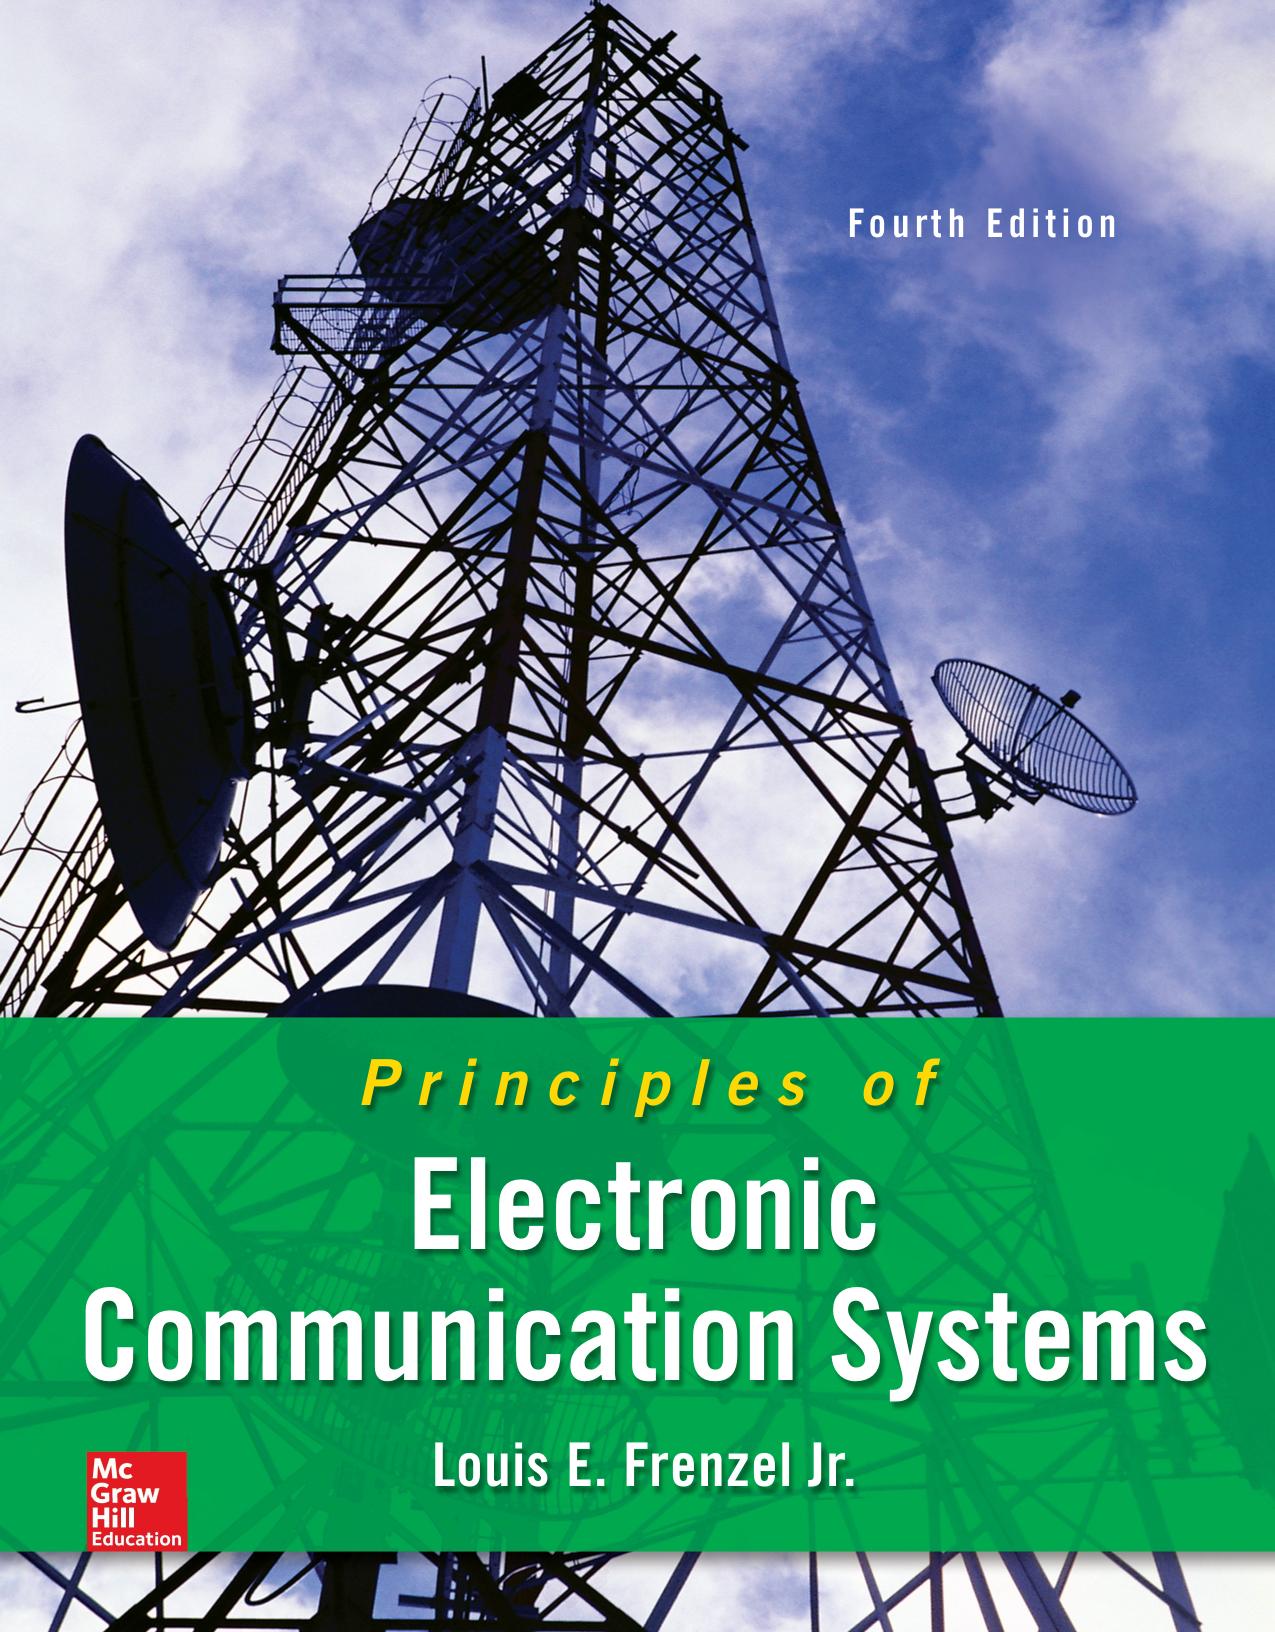 PRINCIPLES OF ELECTRONIC COMMUNICATION SYSTEMS 4th ed. 2014.pdf